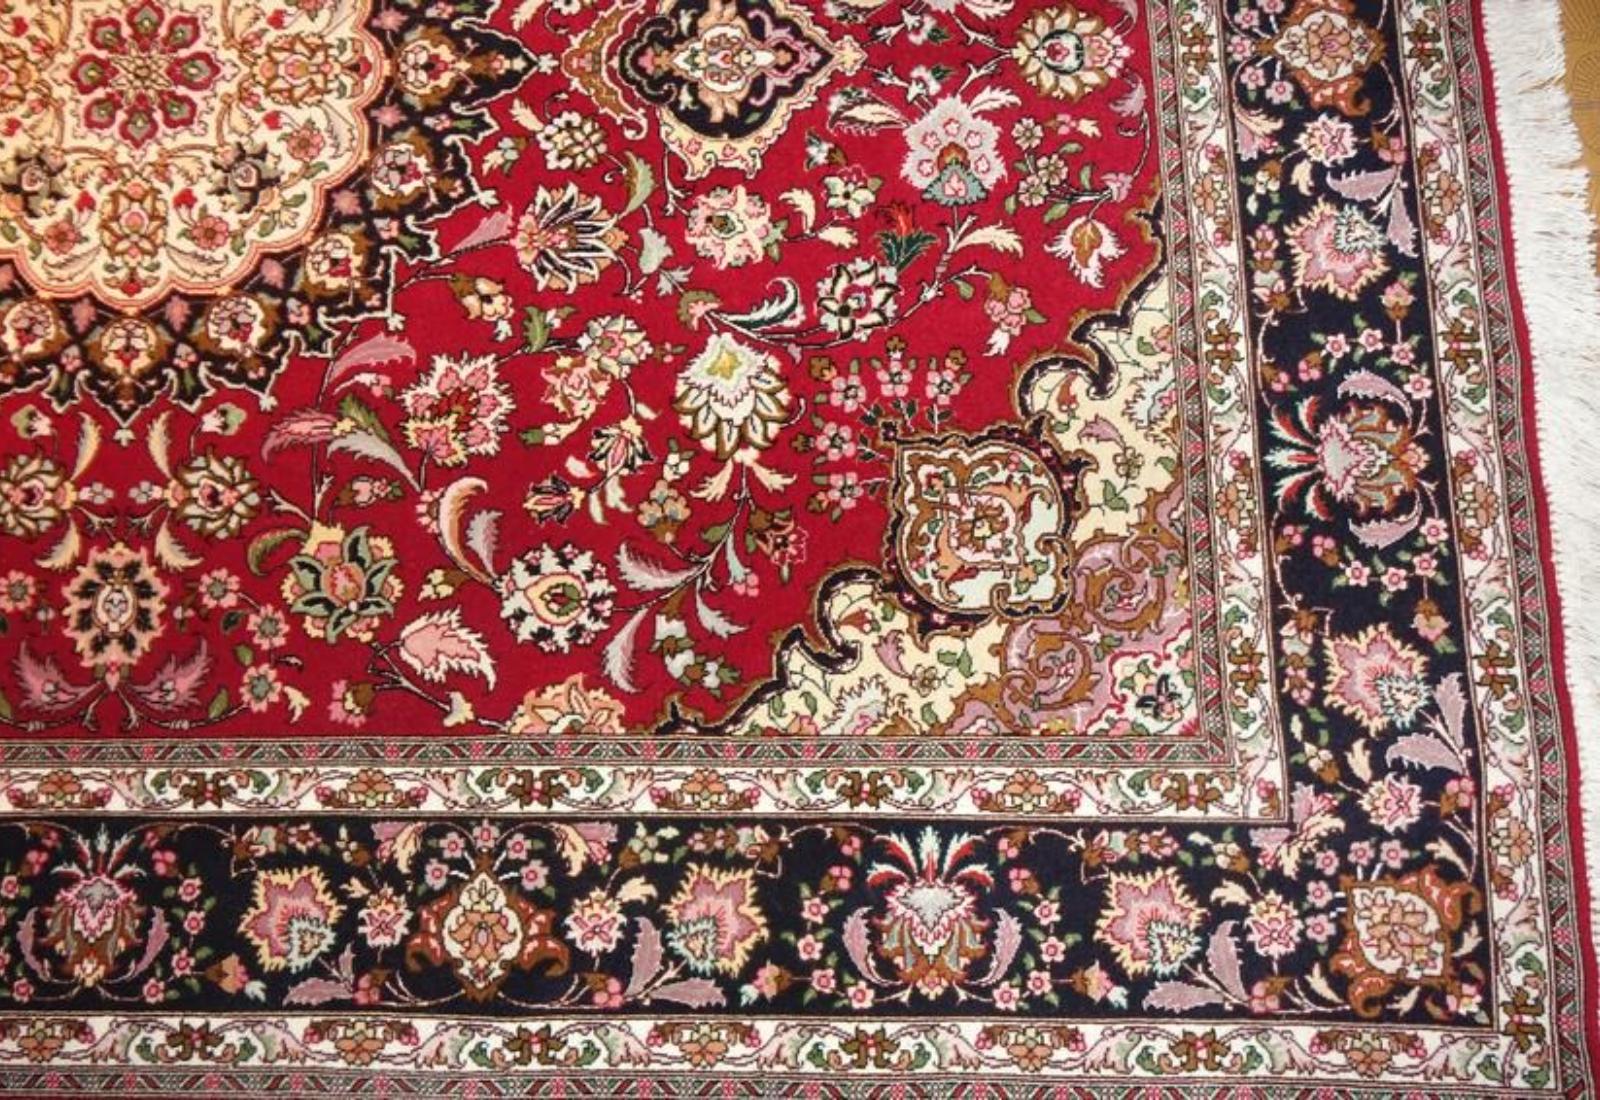 Very fine Persian Tabriz Silk & Wool - 5' 6.1' In Good Condition For Sale In Newmanstown, PA